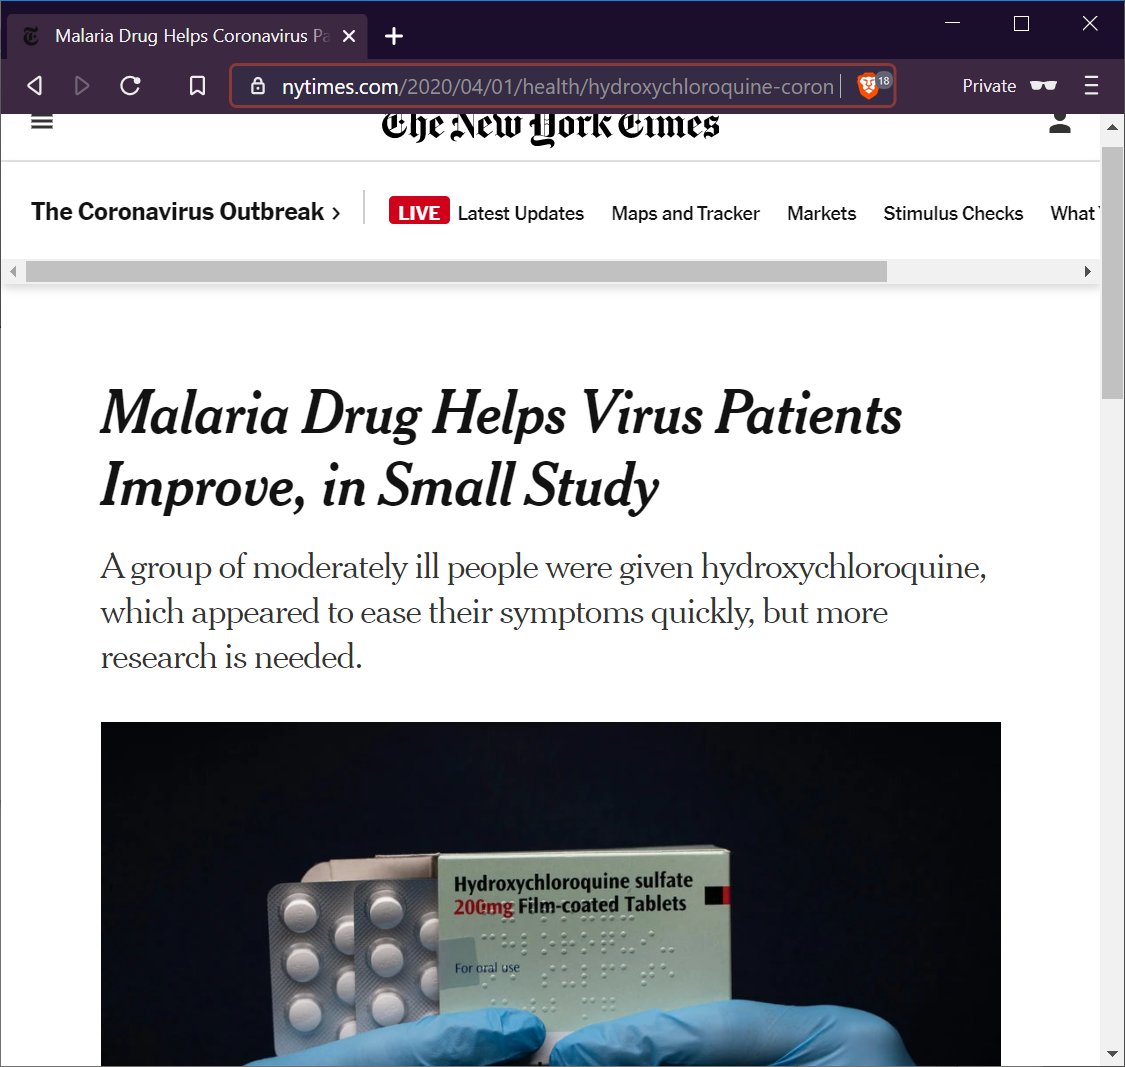 Part of the problem is that journalists can't provide context. Trump's support for hydroxychloroquine is virulently anti-science, but the NYTimes doesn't employ people who understand science to provide context. https://www.nytimes.com/2020/04/01/health/hydroxychloroquine-coronavirus-malaria.html